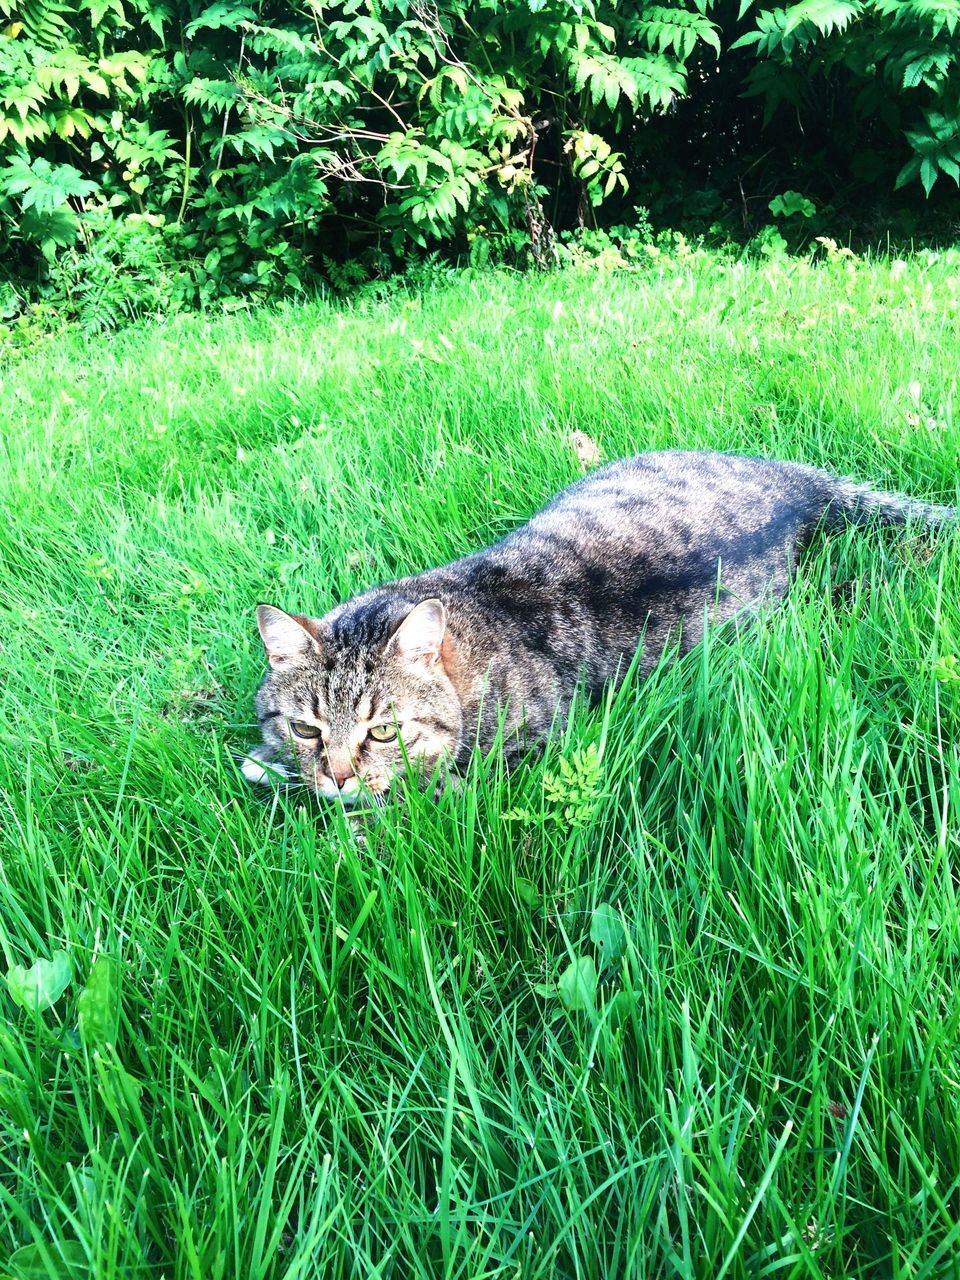 grass, one animal, animal themes, domestic animals, pets, mammal, green color, grassy, domestic cat, field, feline, cat, day, outdoors, nature, growth, animal head, tranquility, zoology, animal